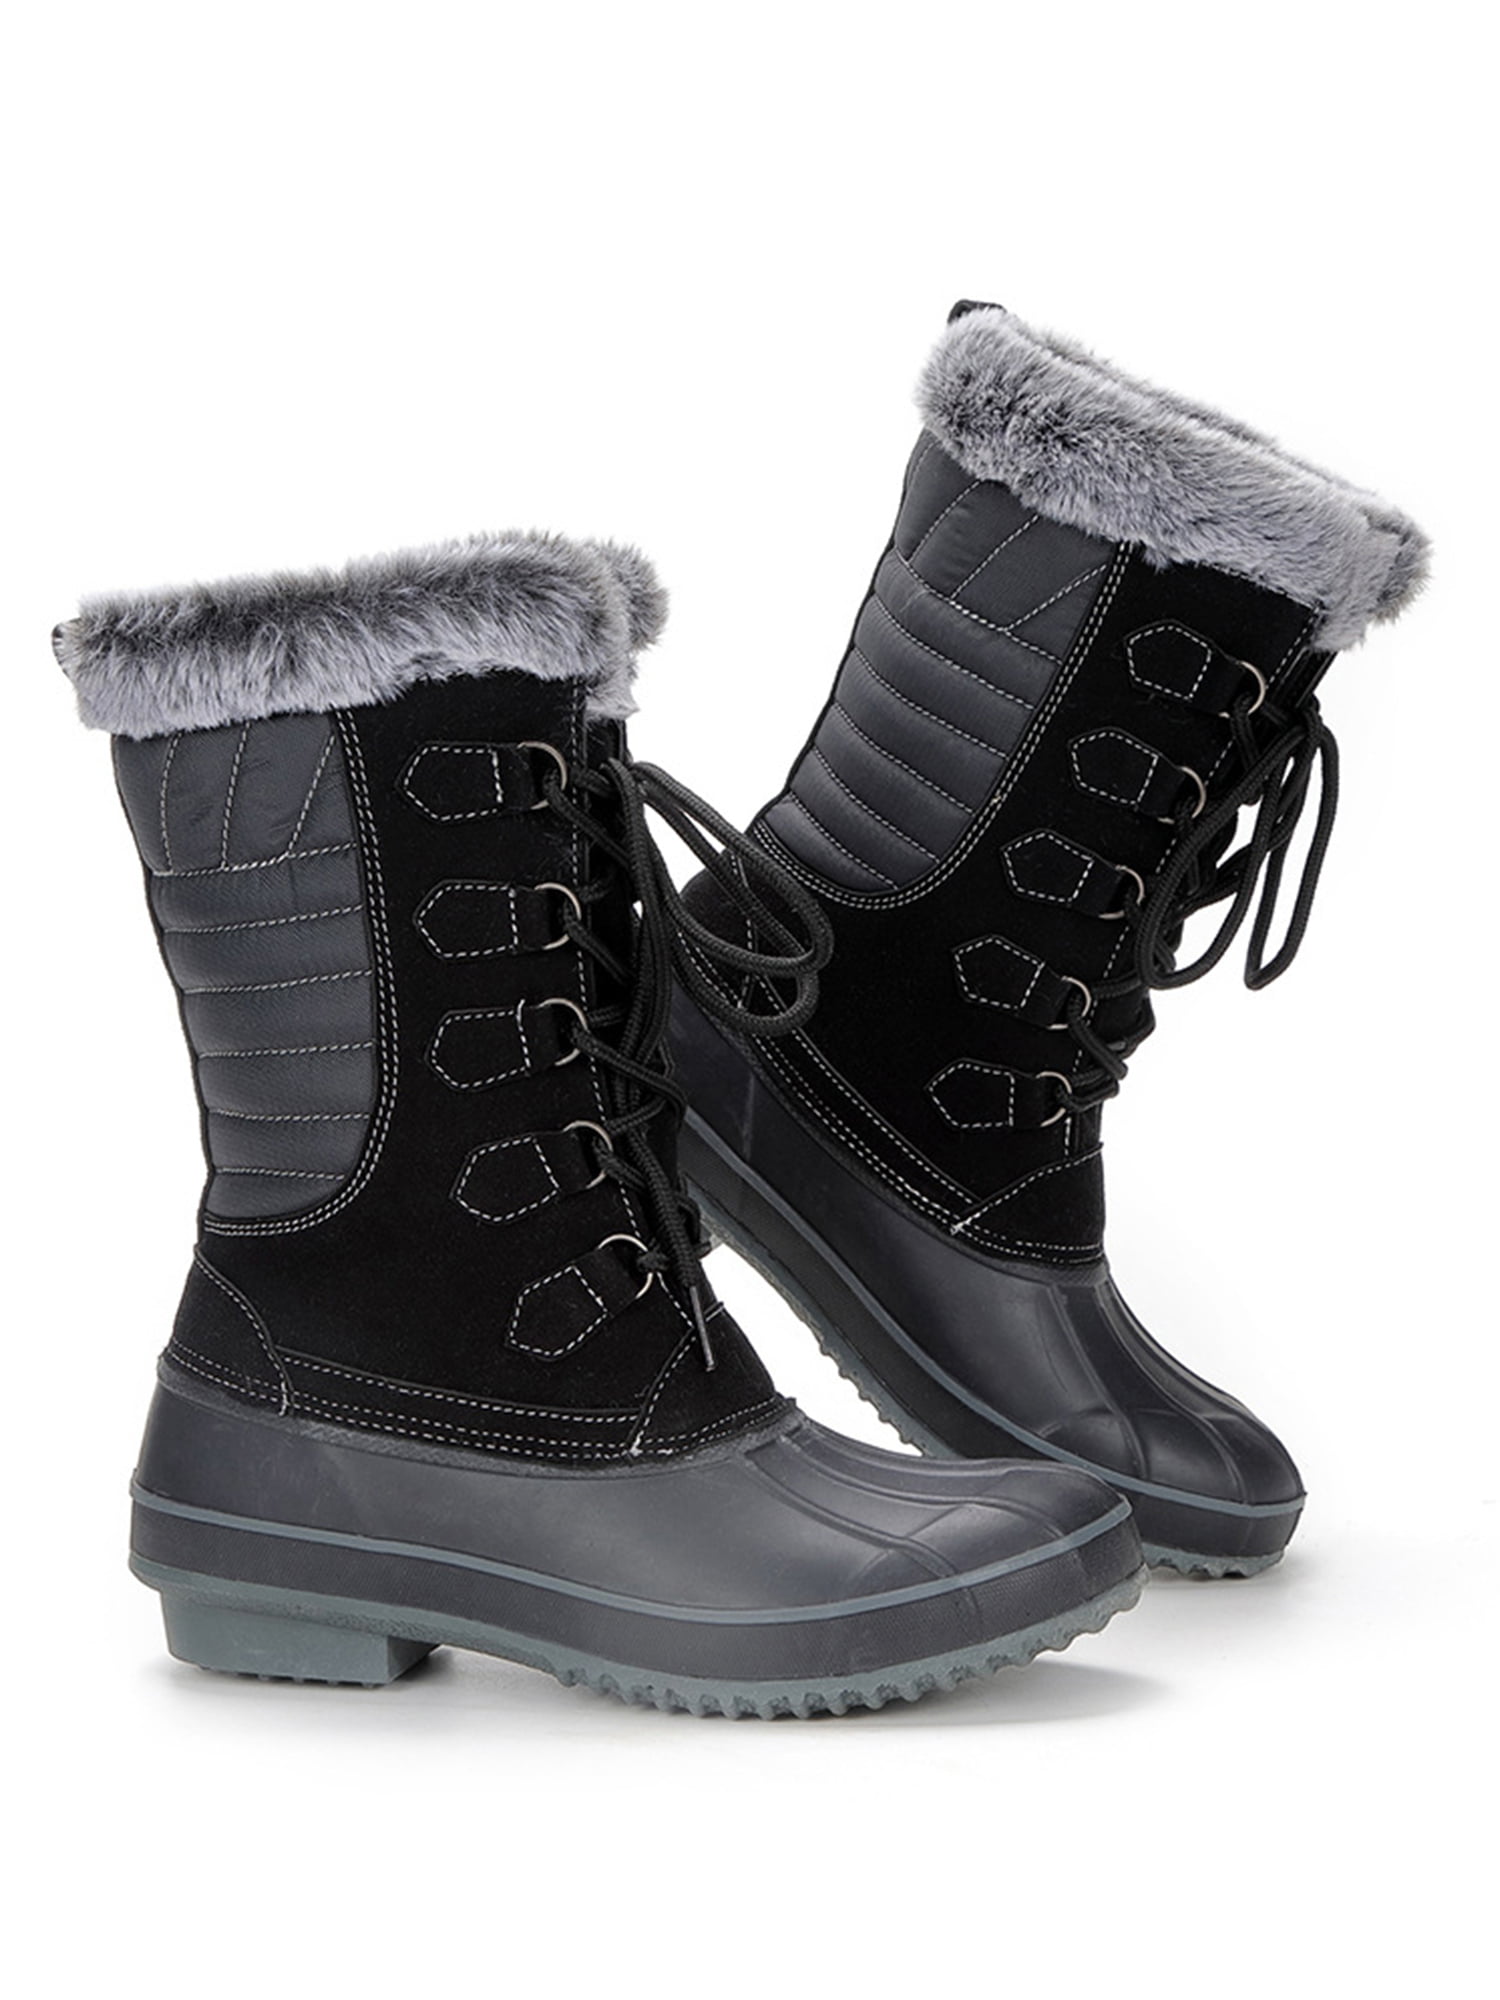 Winter Boots Fashion Women and Children Warm Boots Waterproof Non-Slip Snow Boots Mother Boots